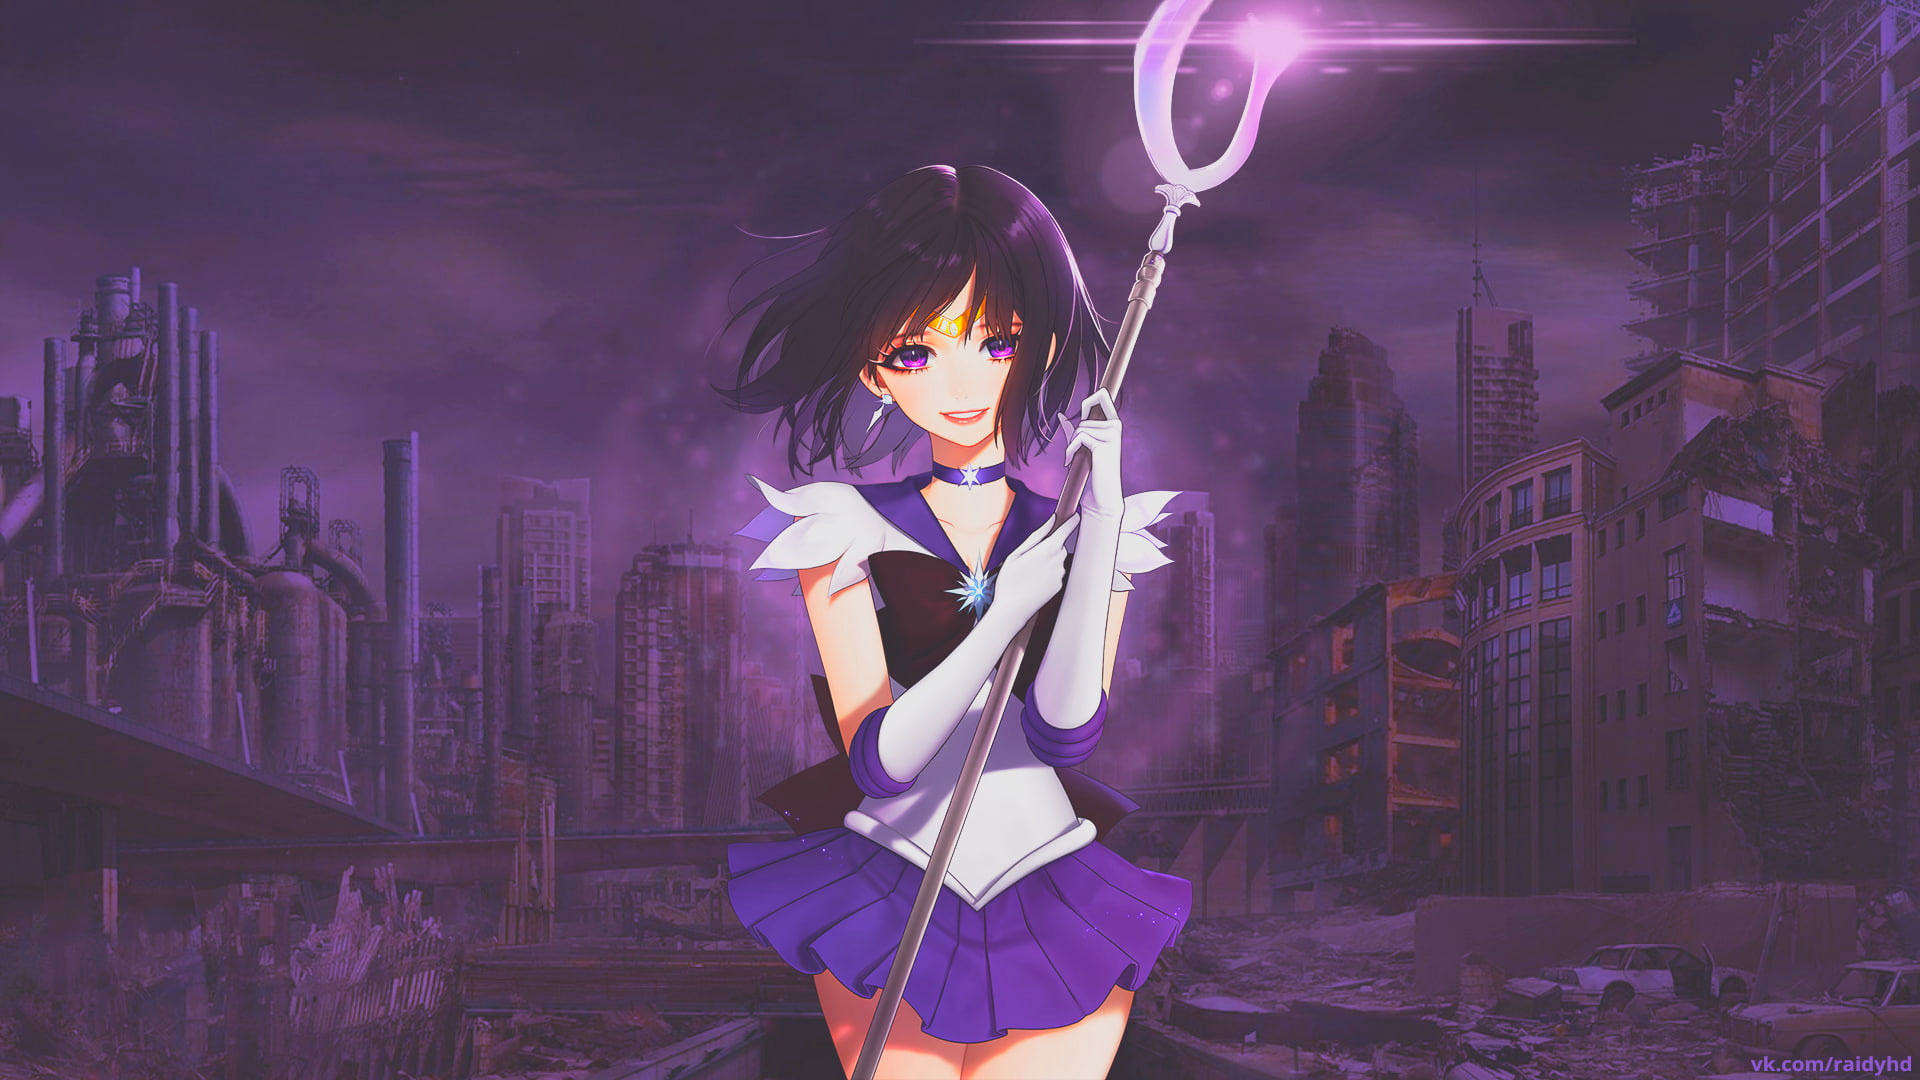 Wallpaper Anime, Anime Girls, Picture In Picture, Sailor